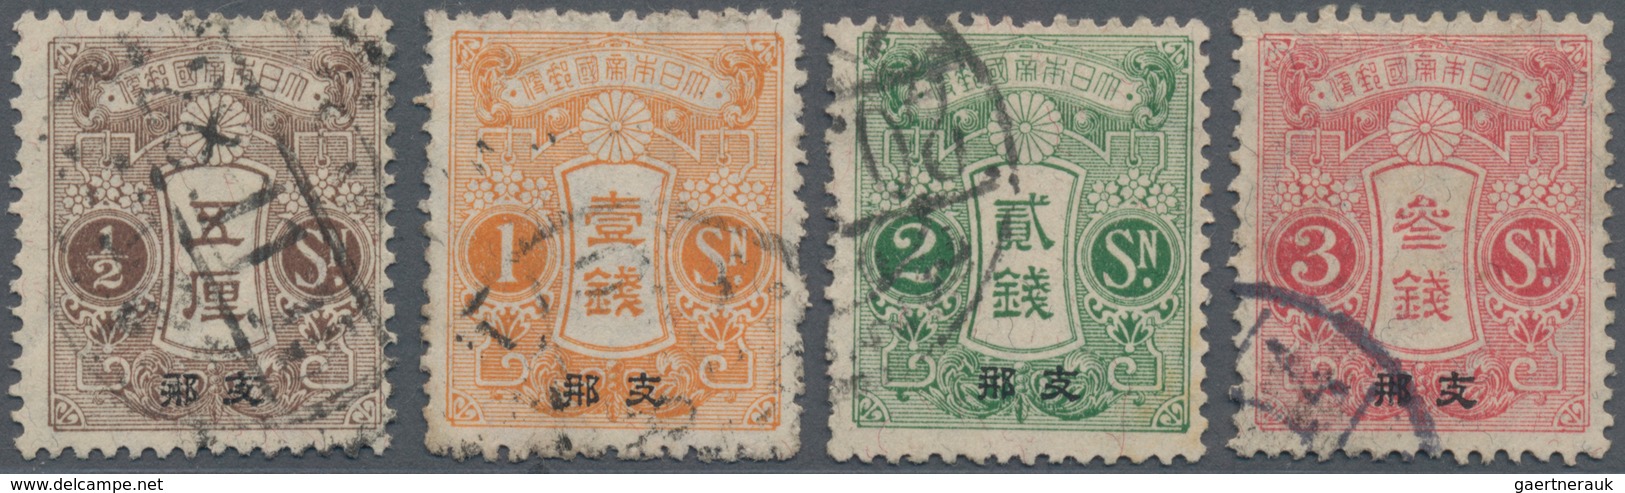 Japanische Post In China: 1900/14, Japanese Offices In China, Mint And Used On Stockcards Inc. Two P - 1943-45 Shanghai & Nanjing